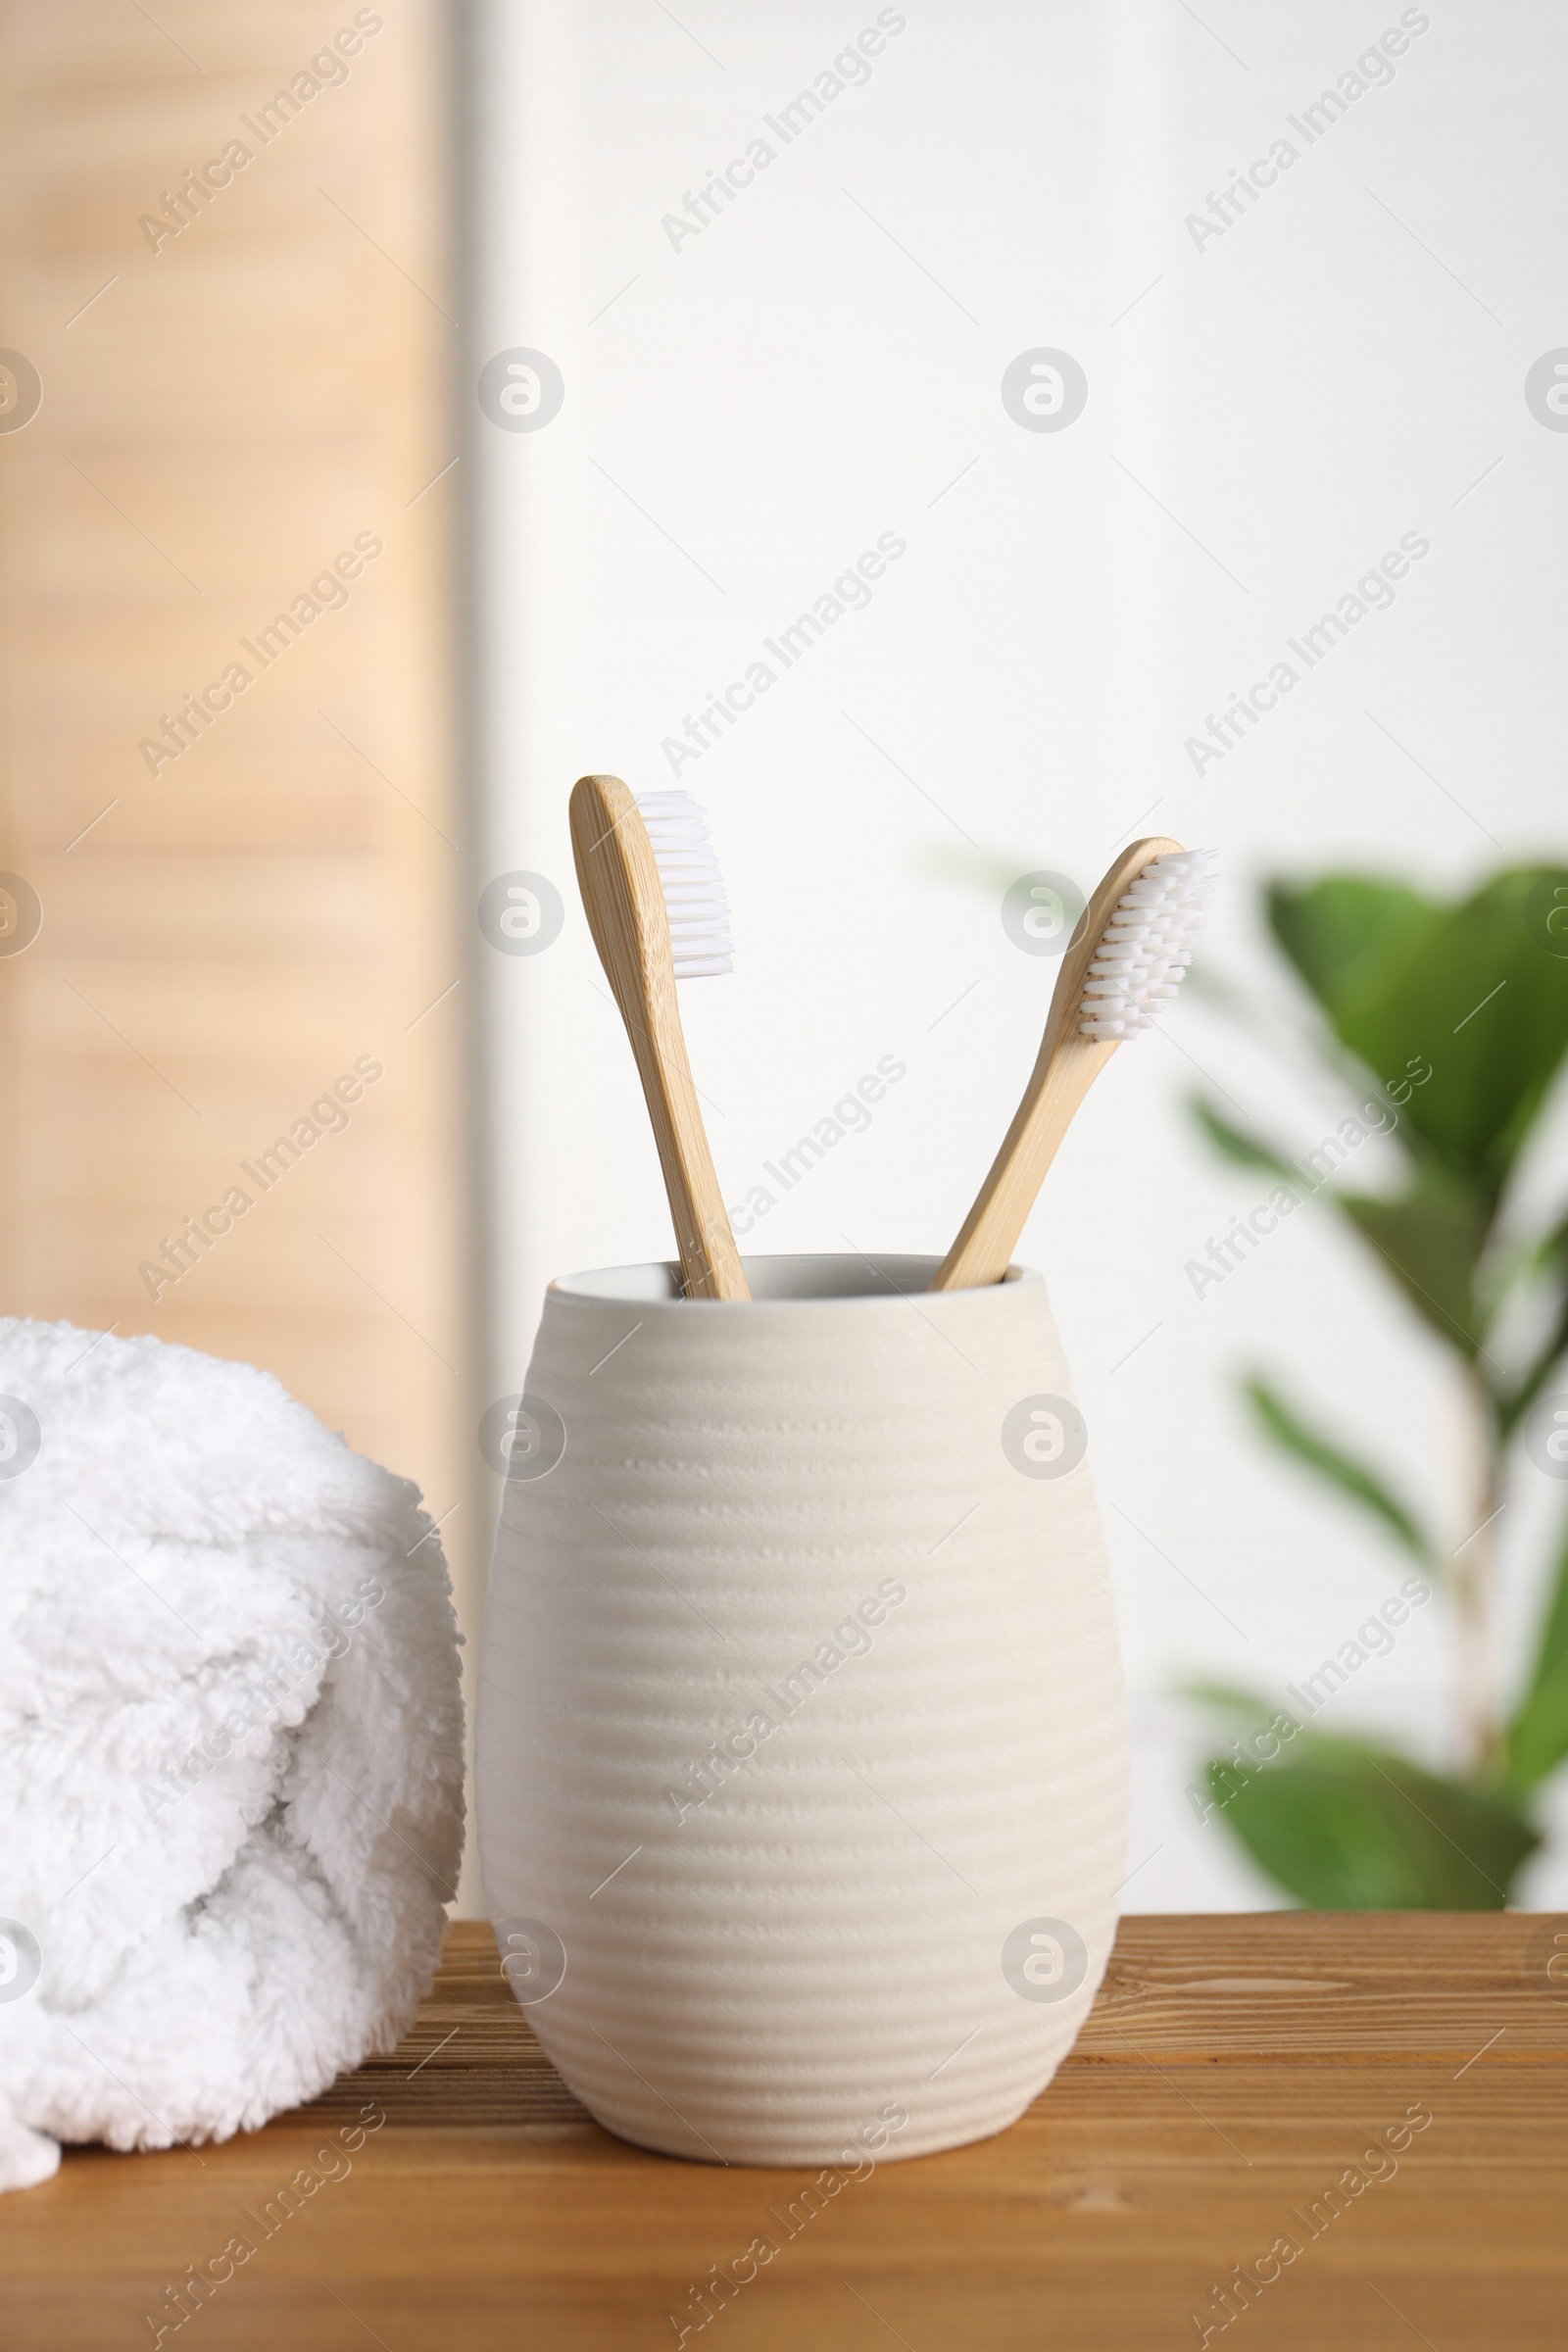 Photo of Holder with bamboo toothbrushes and towel on wooden table in bathroom